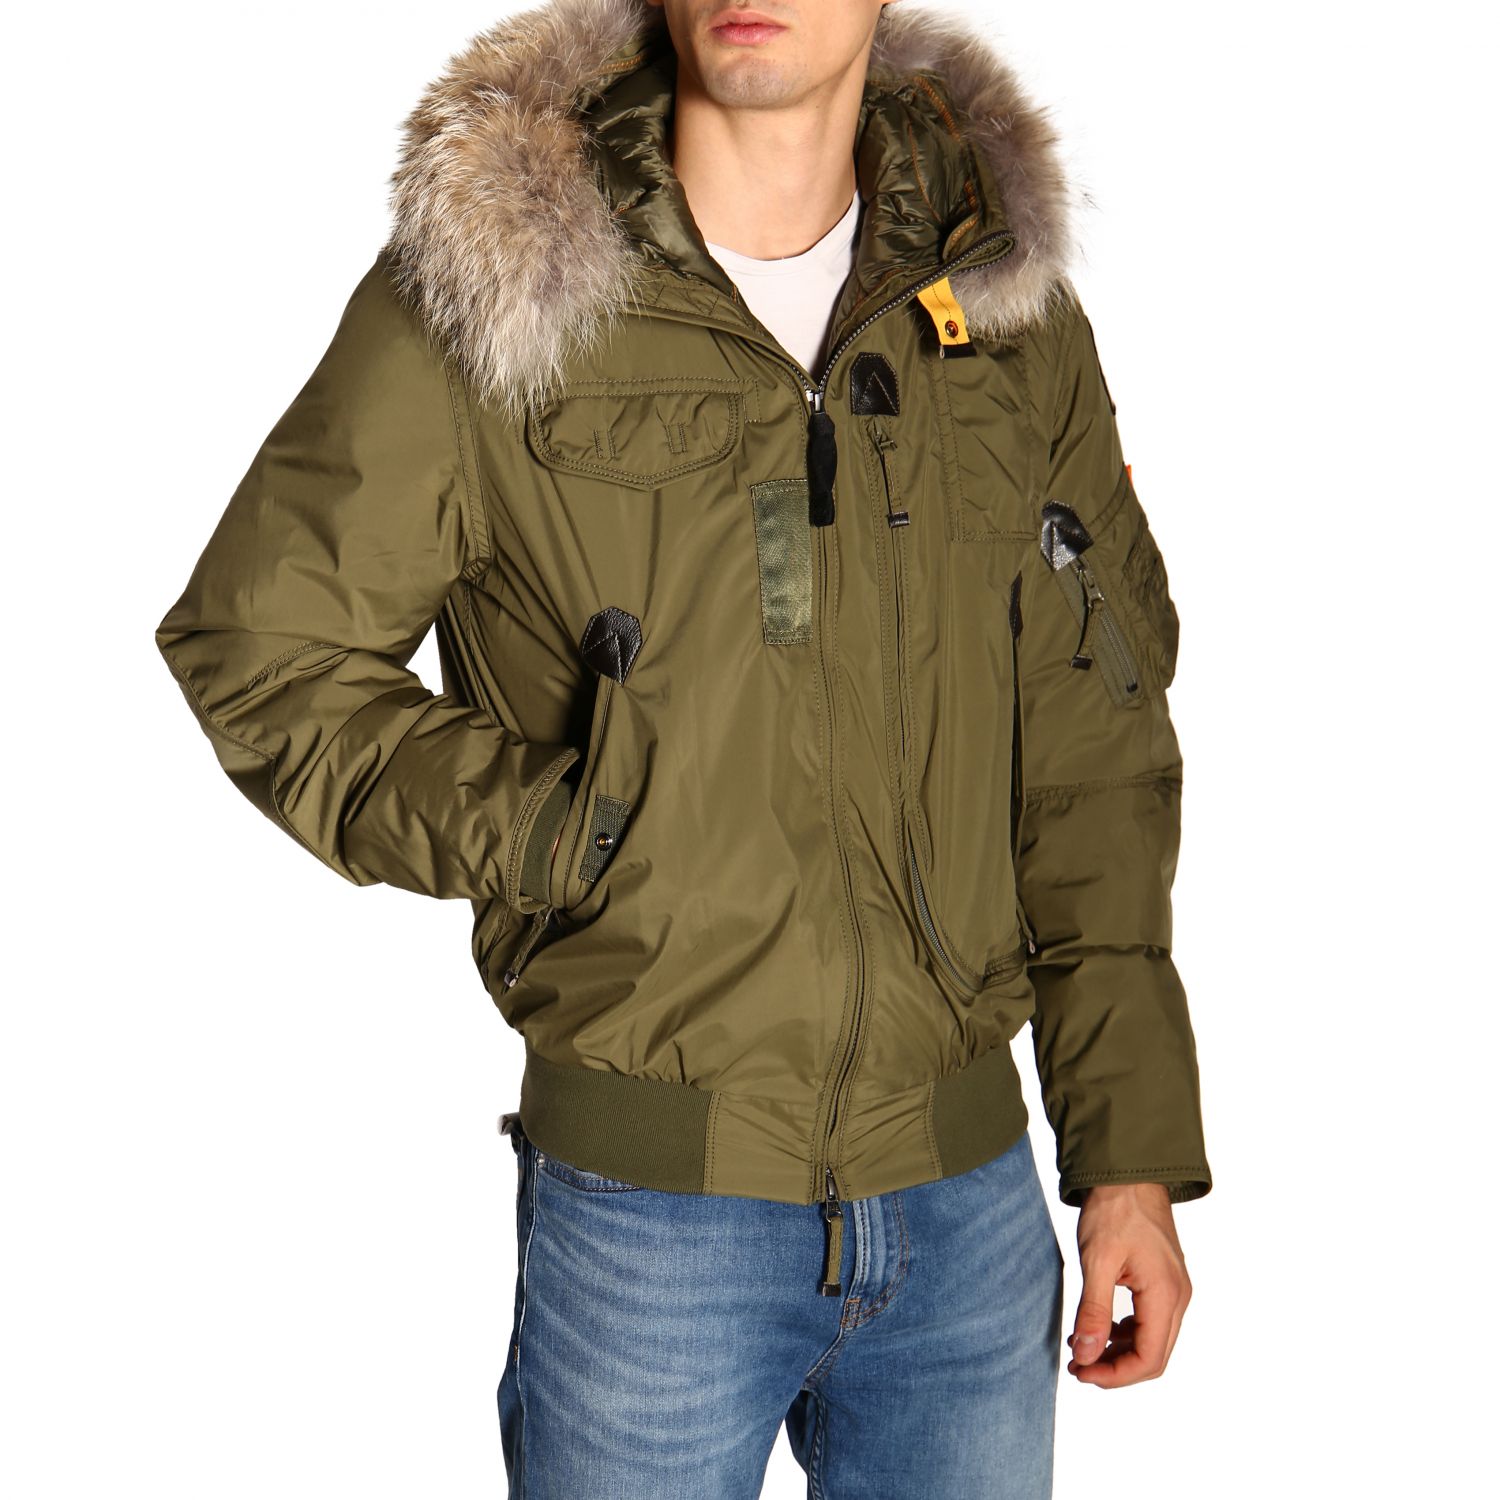 Parajumpers Outlet: coat for man - Green | Parajumpers coat PMJCKMG05 ...